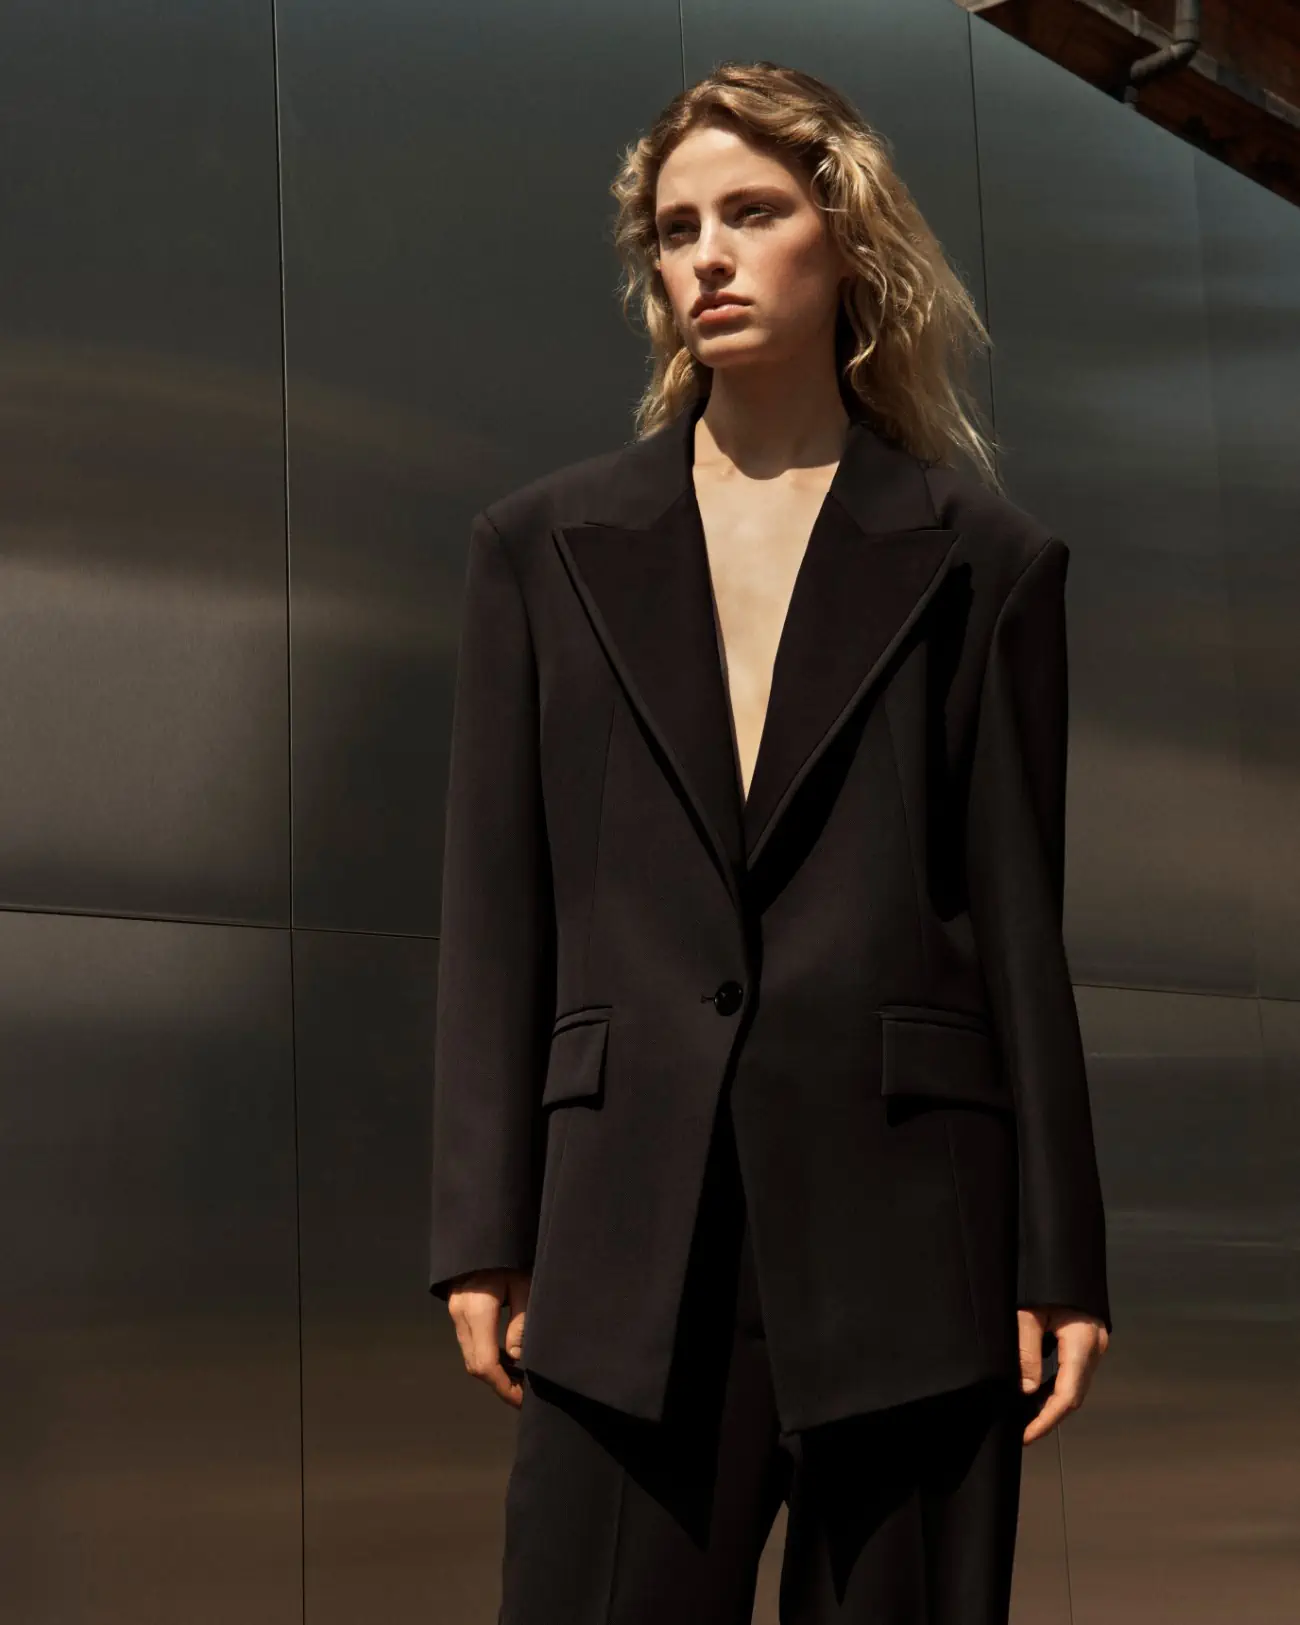 COS Atelier Fall/Winter 2023 blends craftsmanship and quality fabrics ...